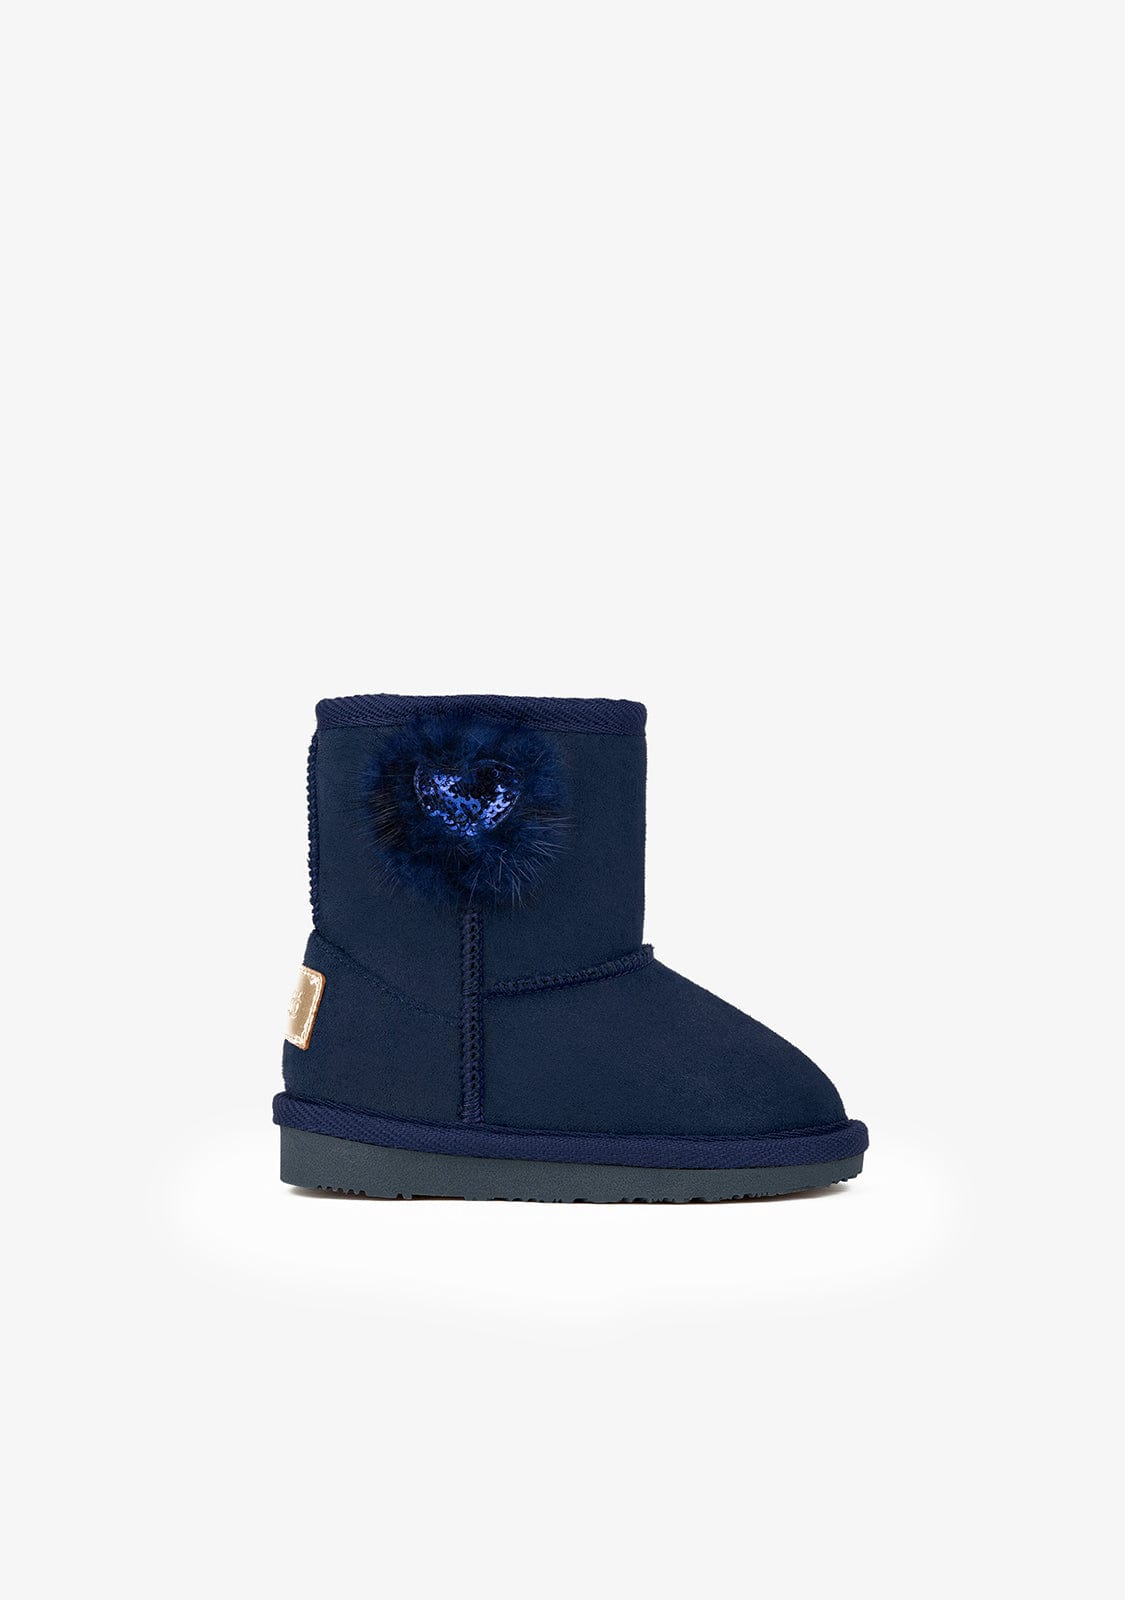 OSITO Shoes Baby's Navy Heart Sequins Australian Boots